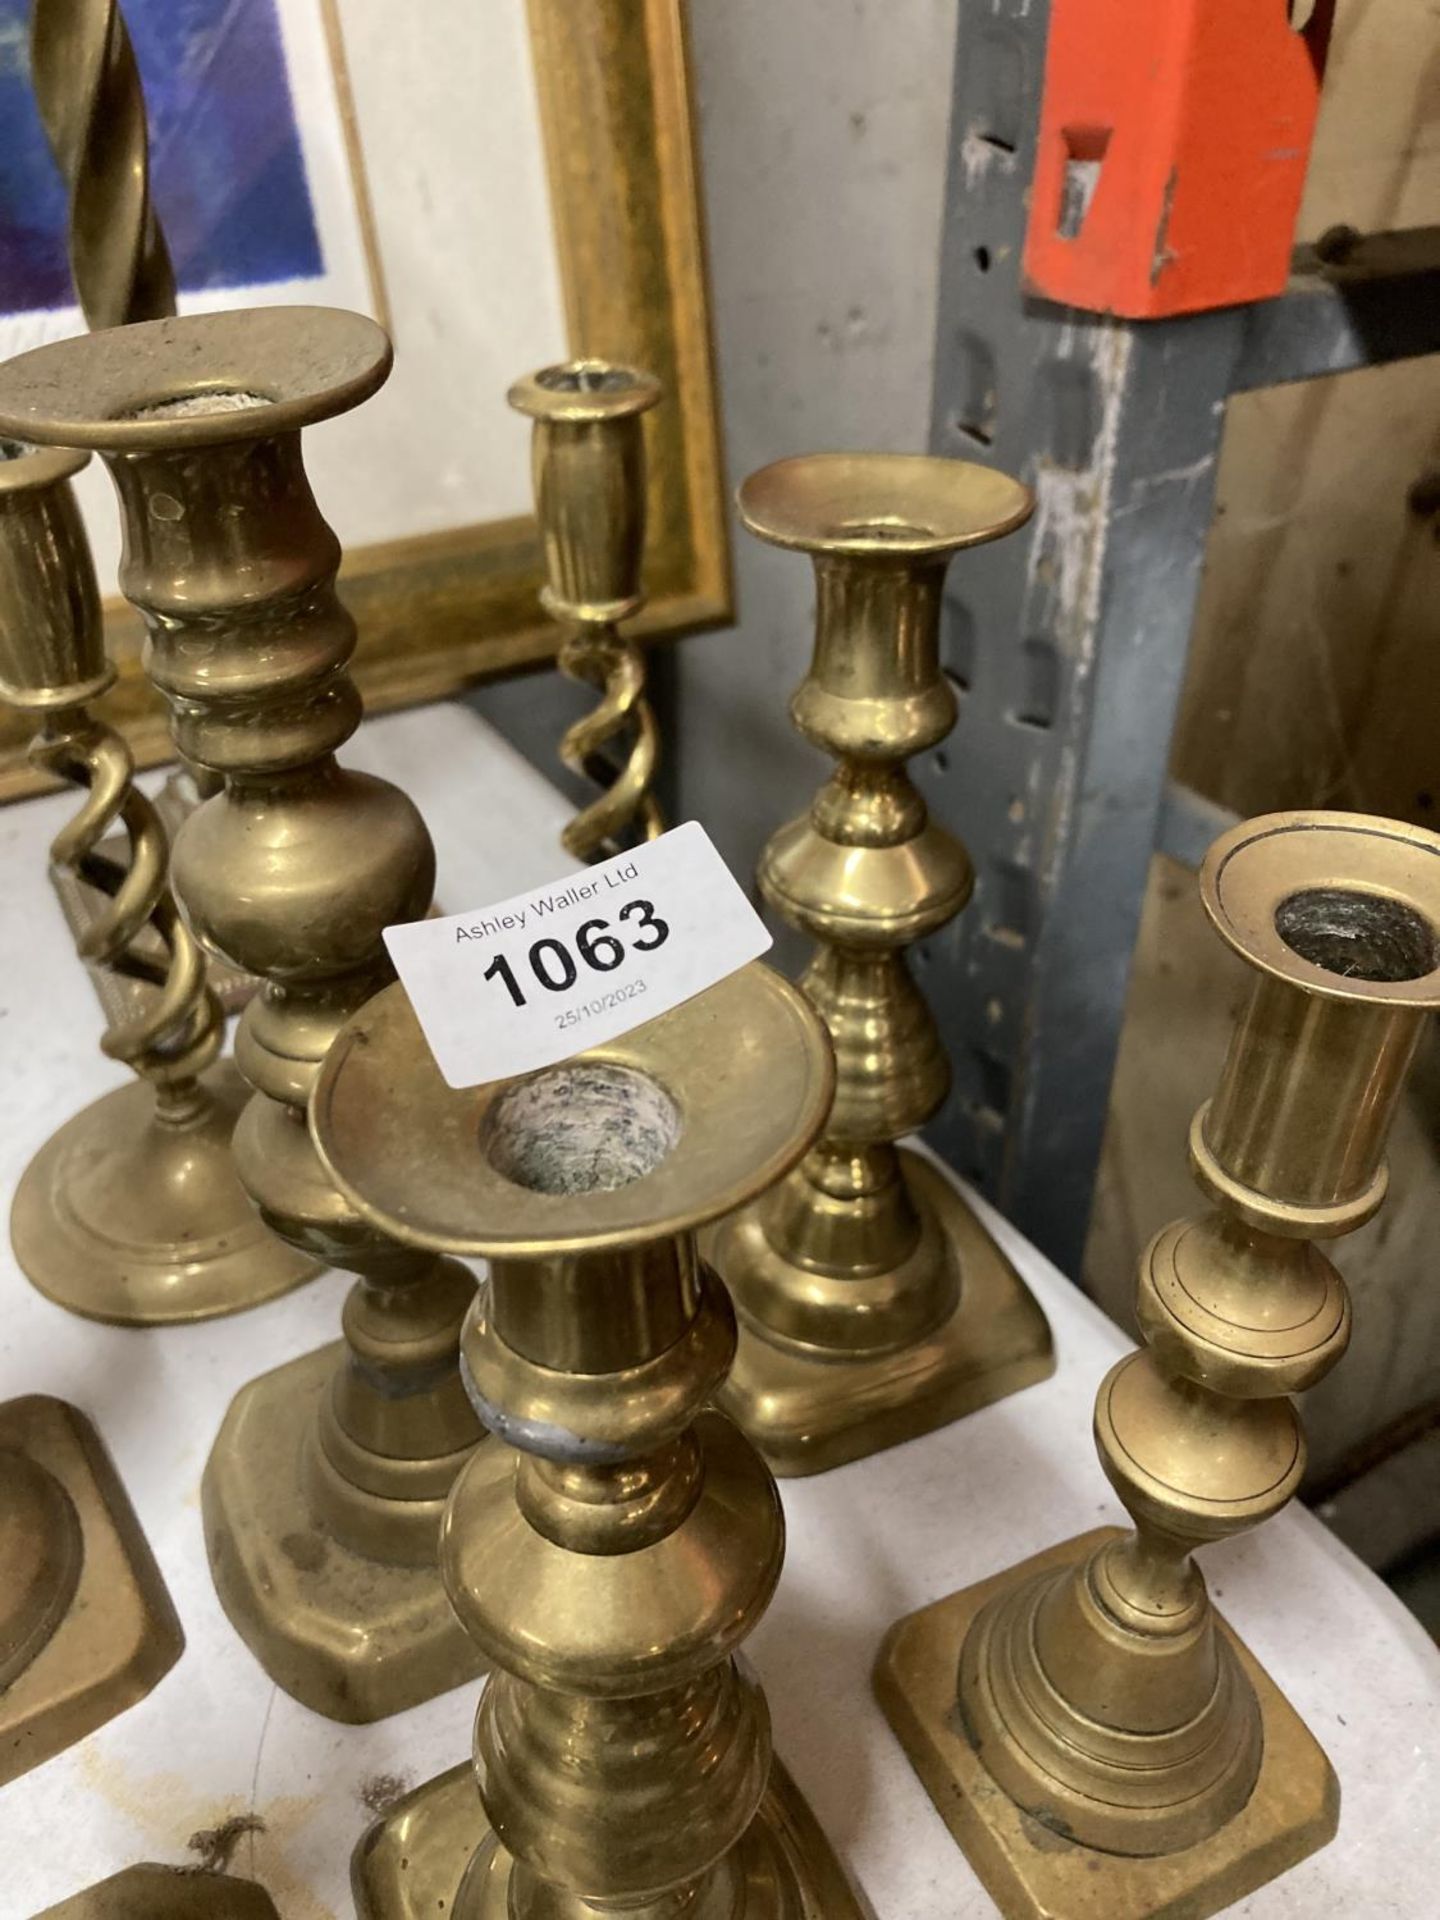 A LARGE QUANTITY OF VINTAGE BRASS CANDLESTICKS - Image 3 of 4